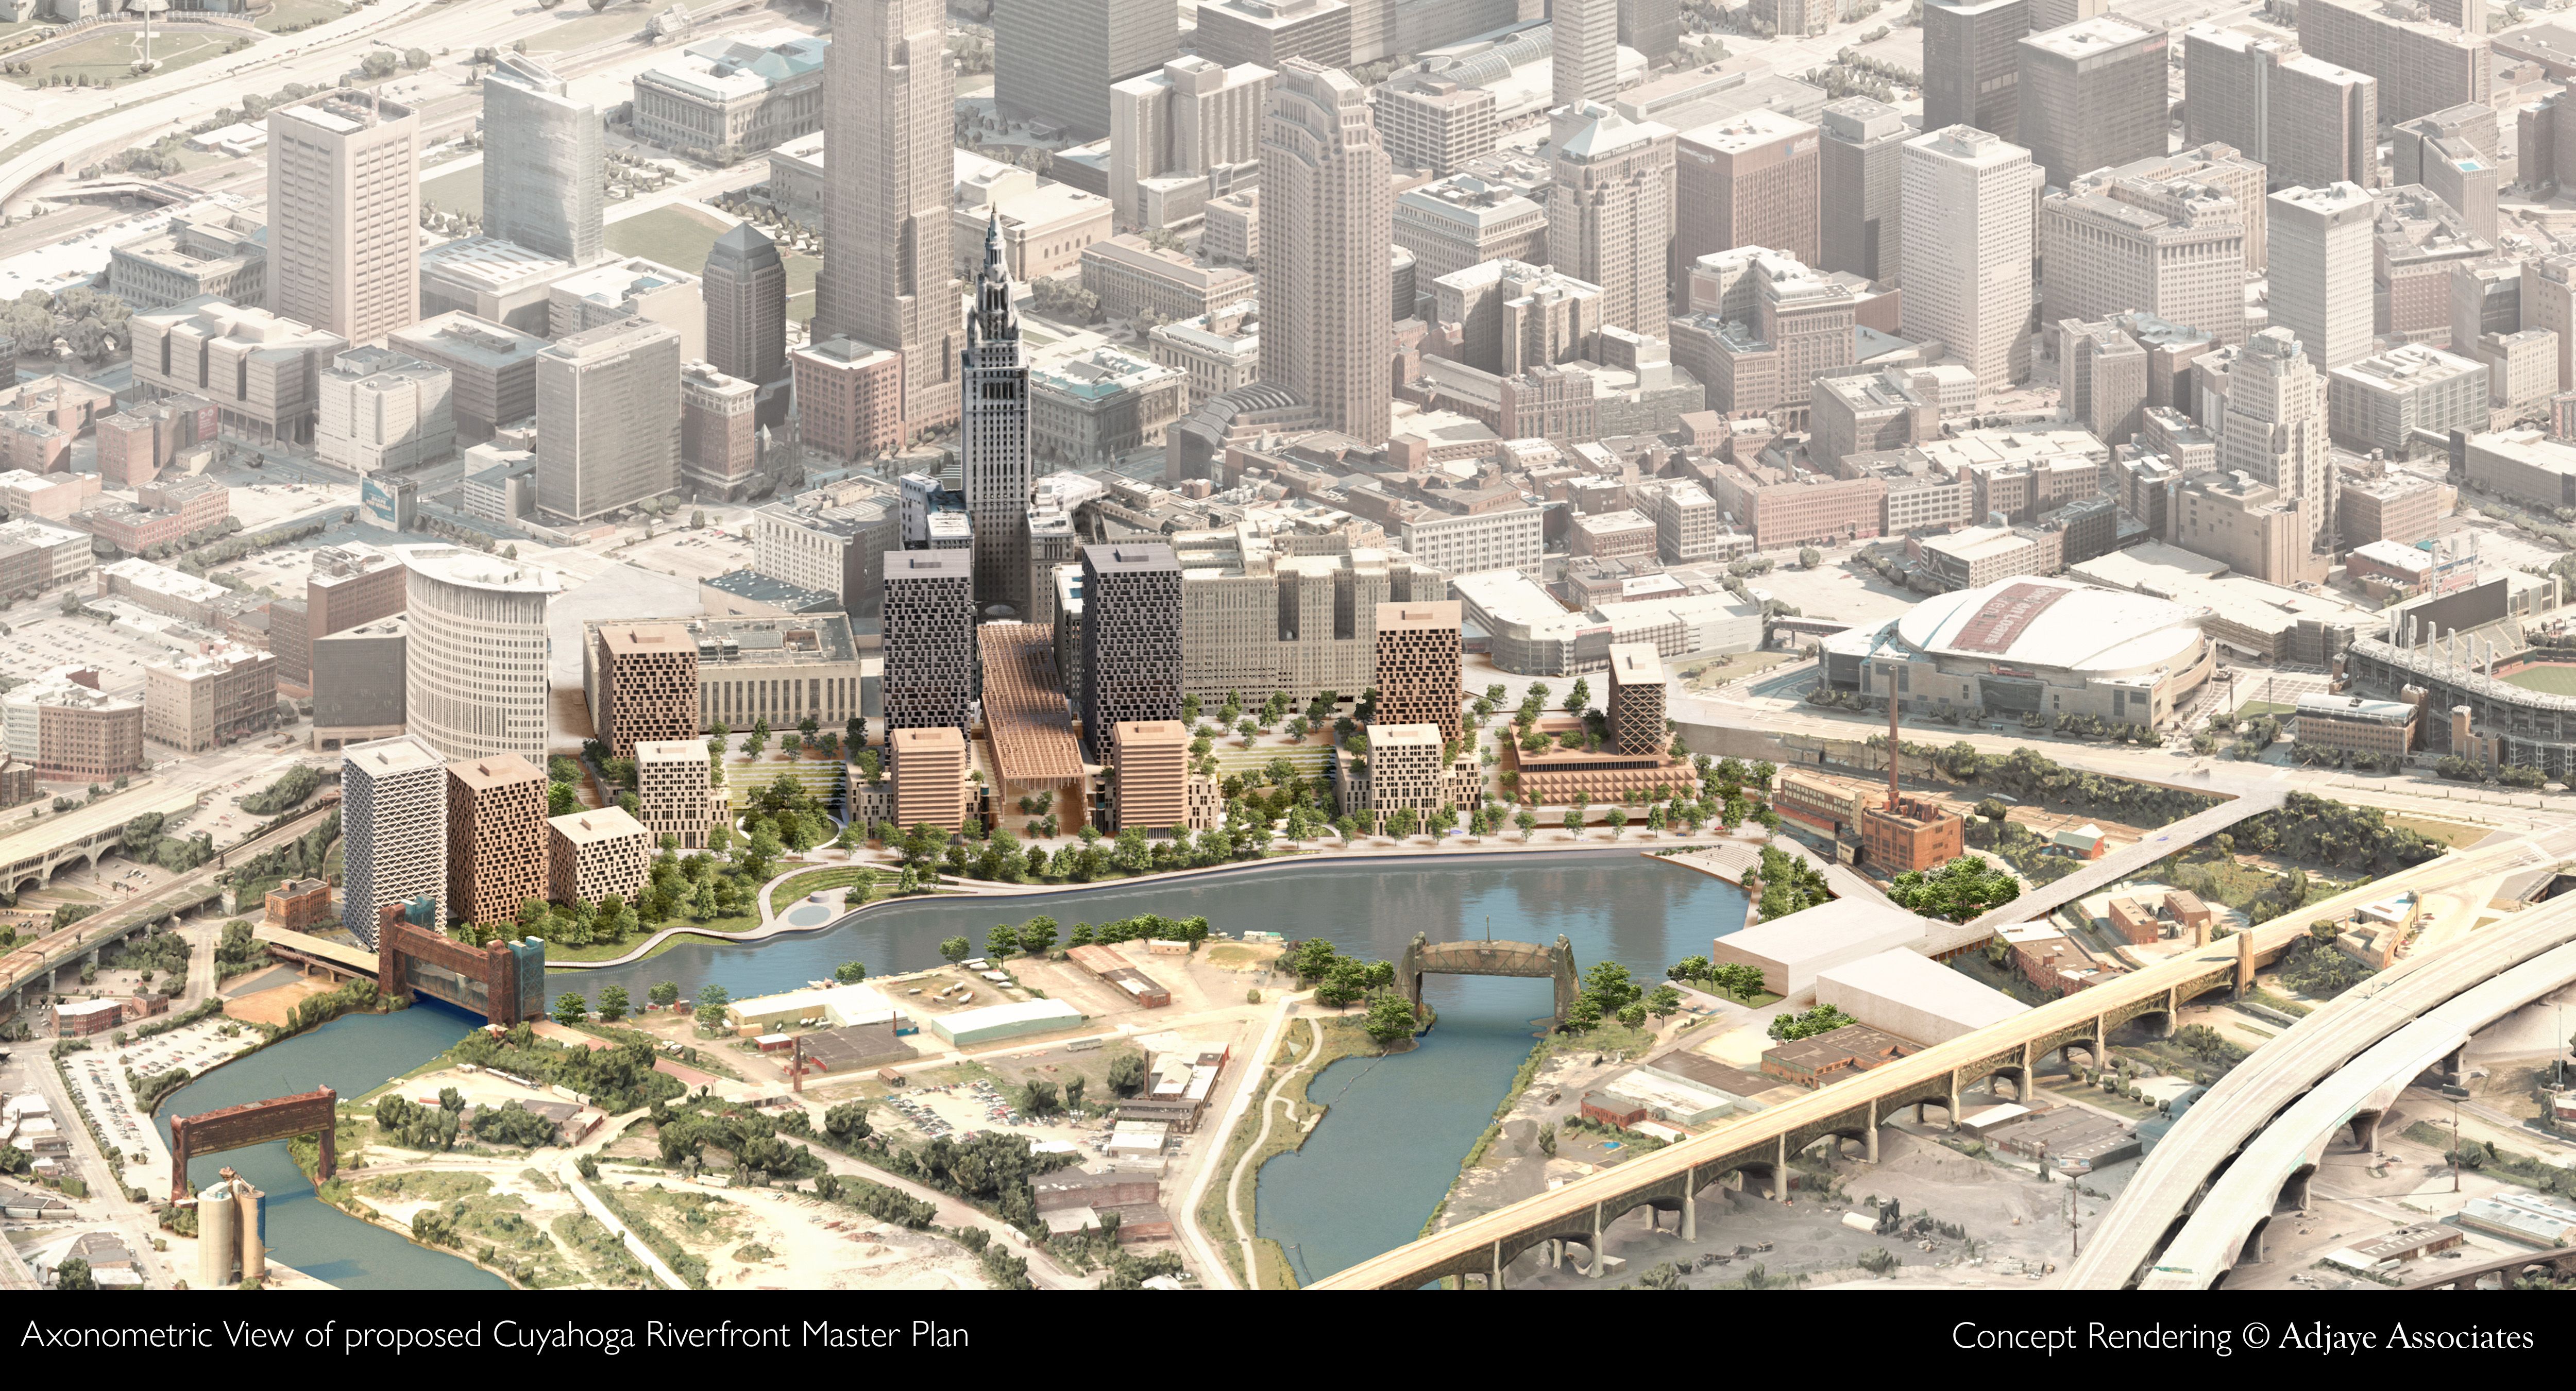 Visual rendering of the new Cuyahoga River master development plan